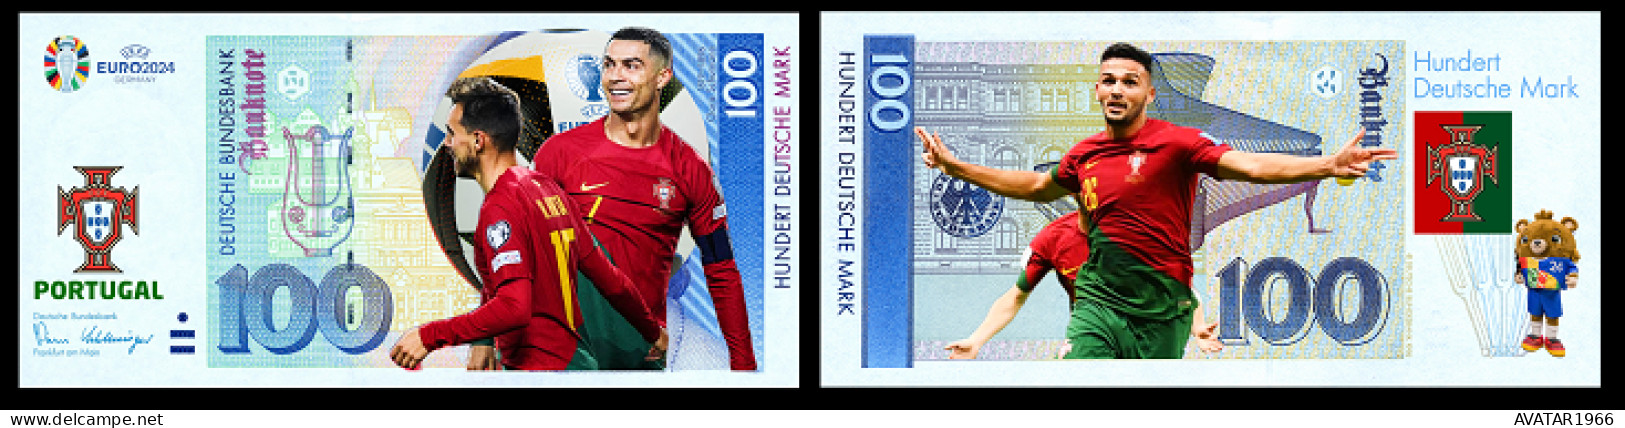 UEFA European Football Championship 2024 qualified country   Portugal 8 pieces Germany fantasy paper money